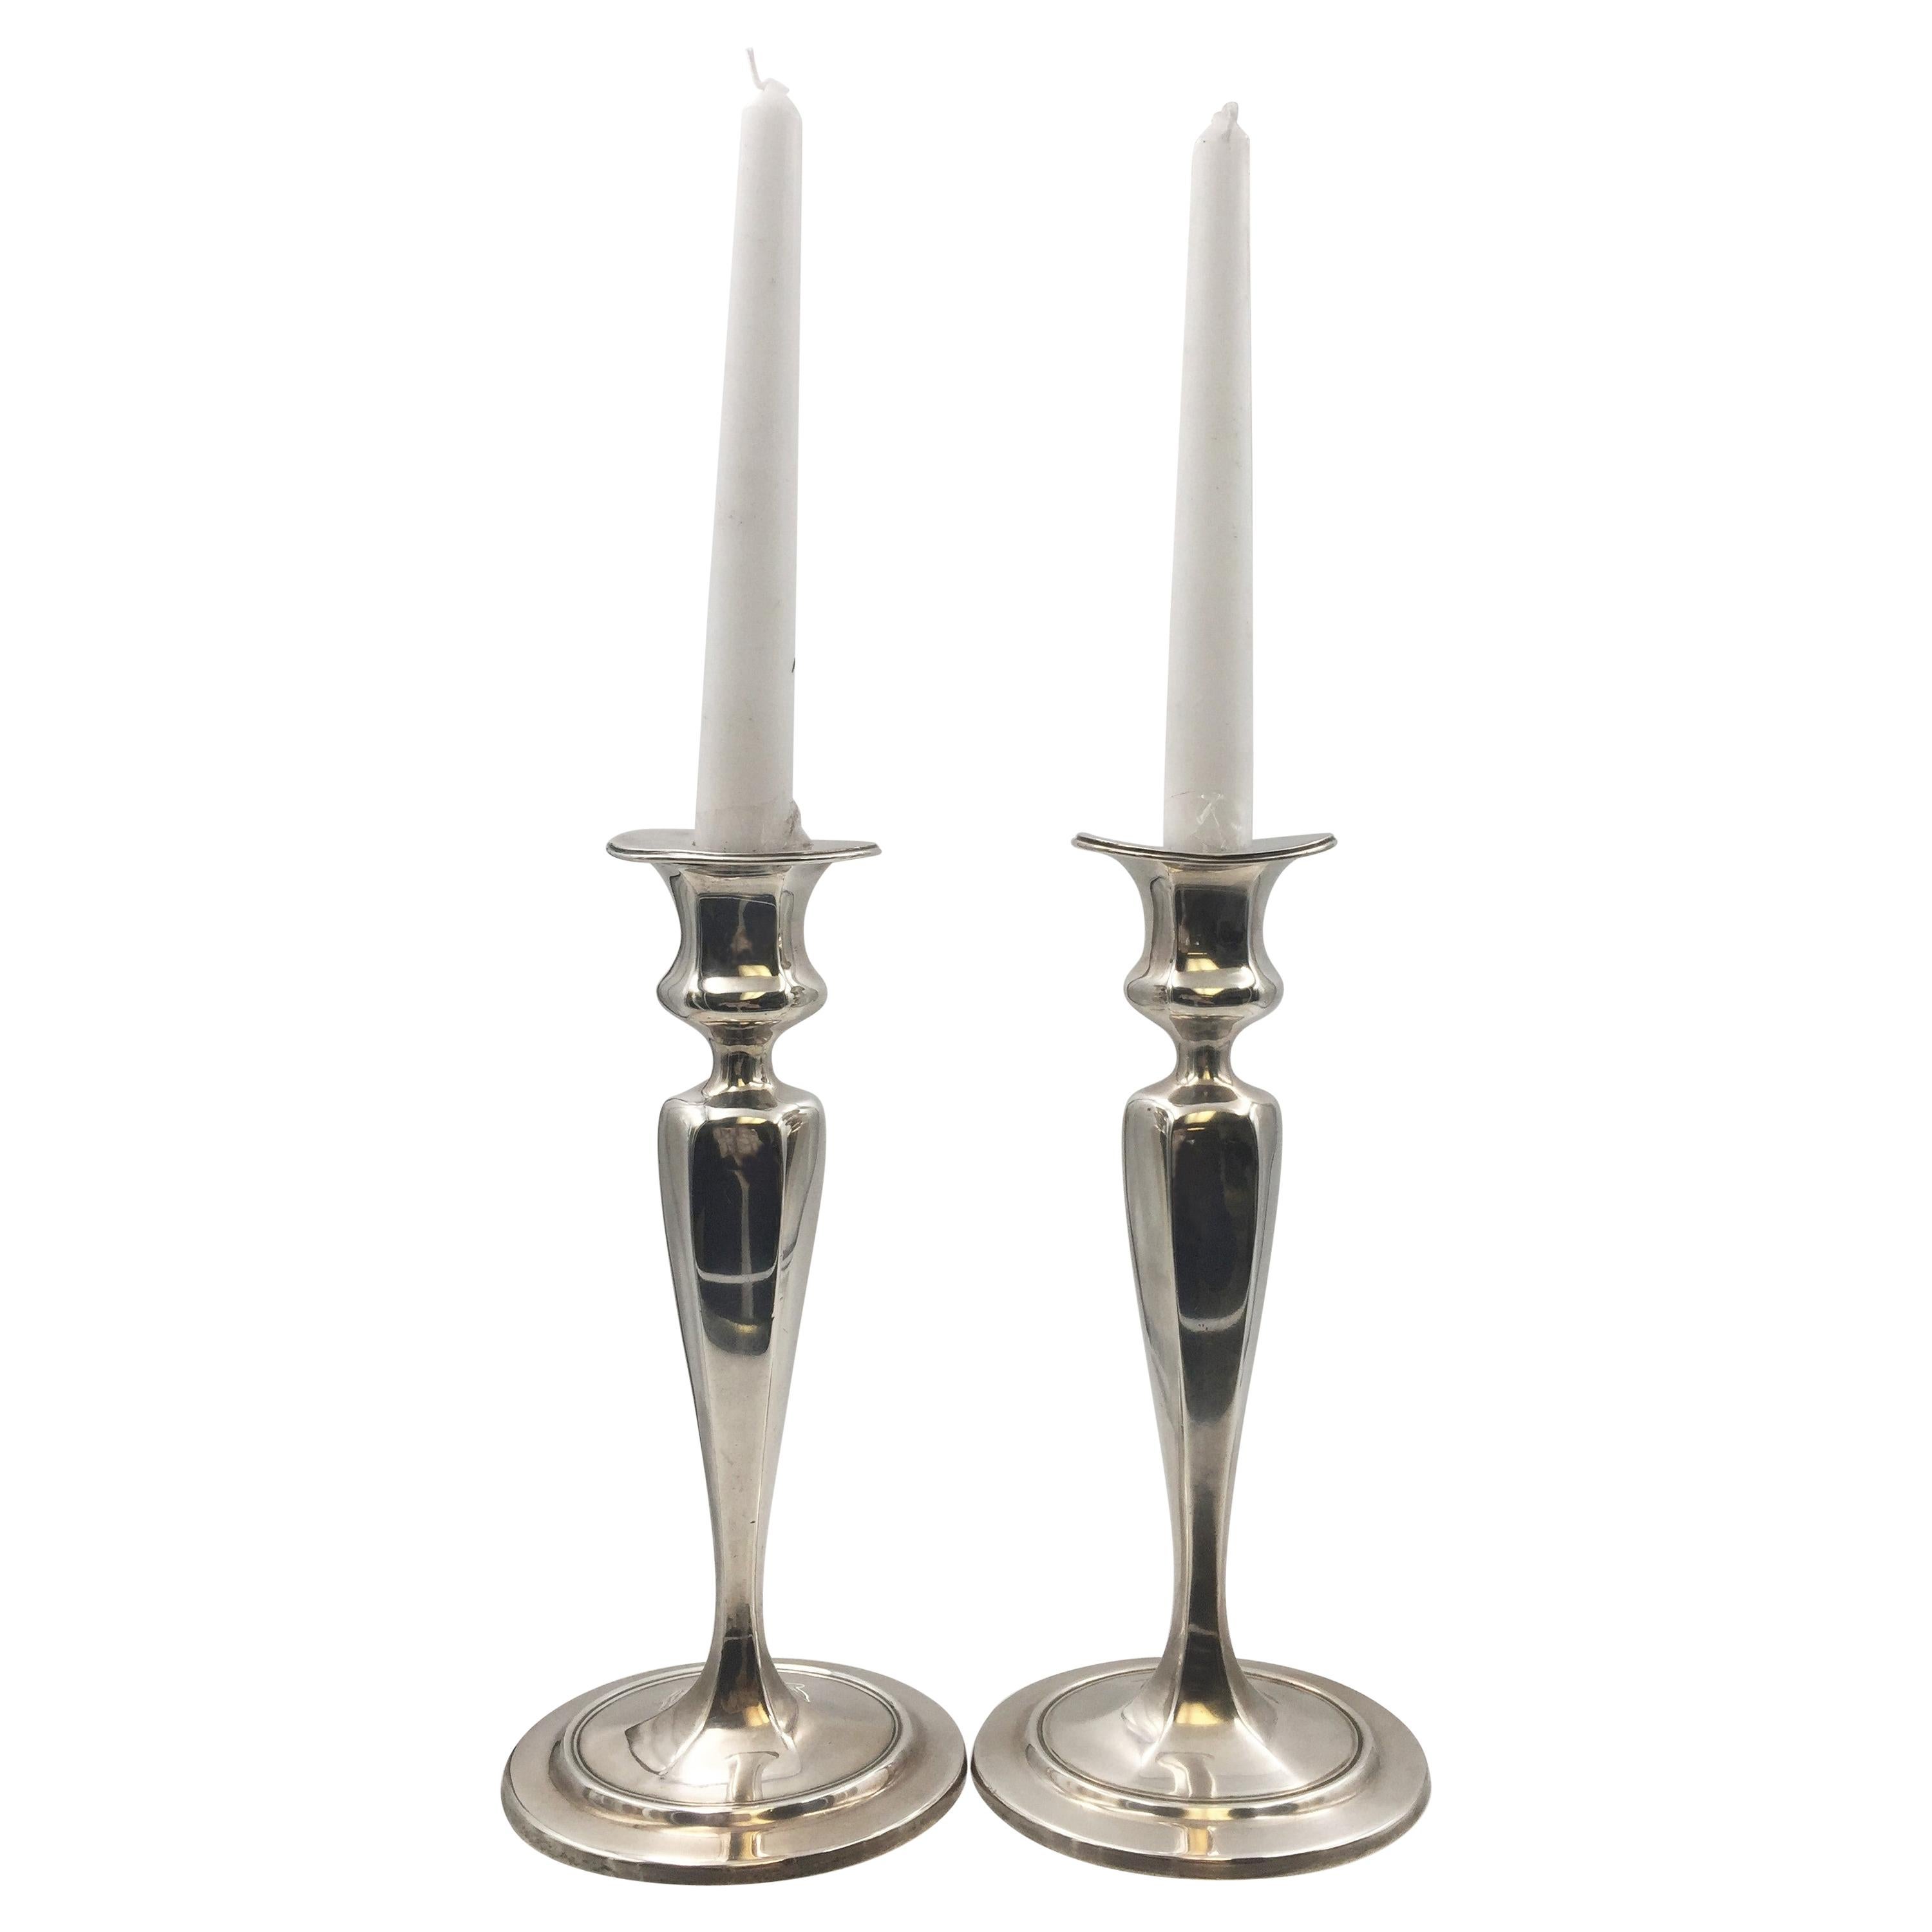 Pair of Tiffany & Co. Sterling Silver Candlesticks from 1910